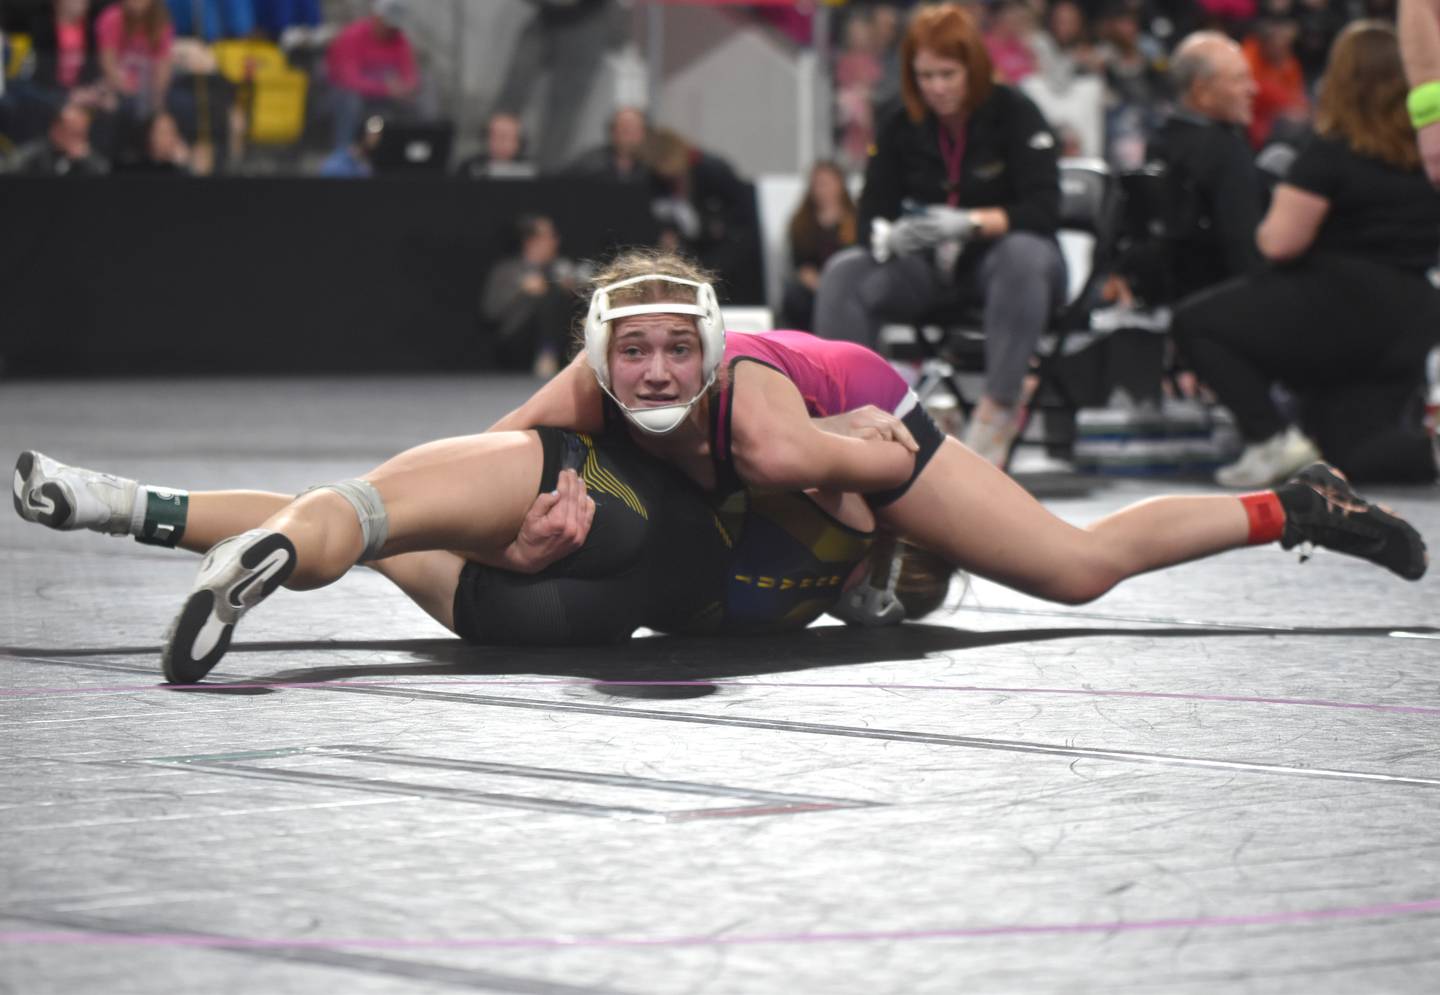 Zoey Vandevender (125) gets back points on Ava Streeter of Duram in her second match at the Iowa High School Girls Wrestling State Tournament Thursday in Coralville. Vandevender won the bout in a second-period pin.